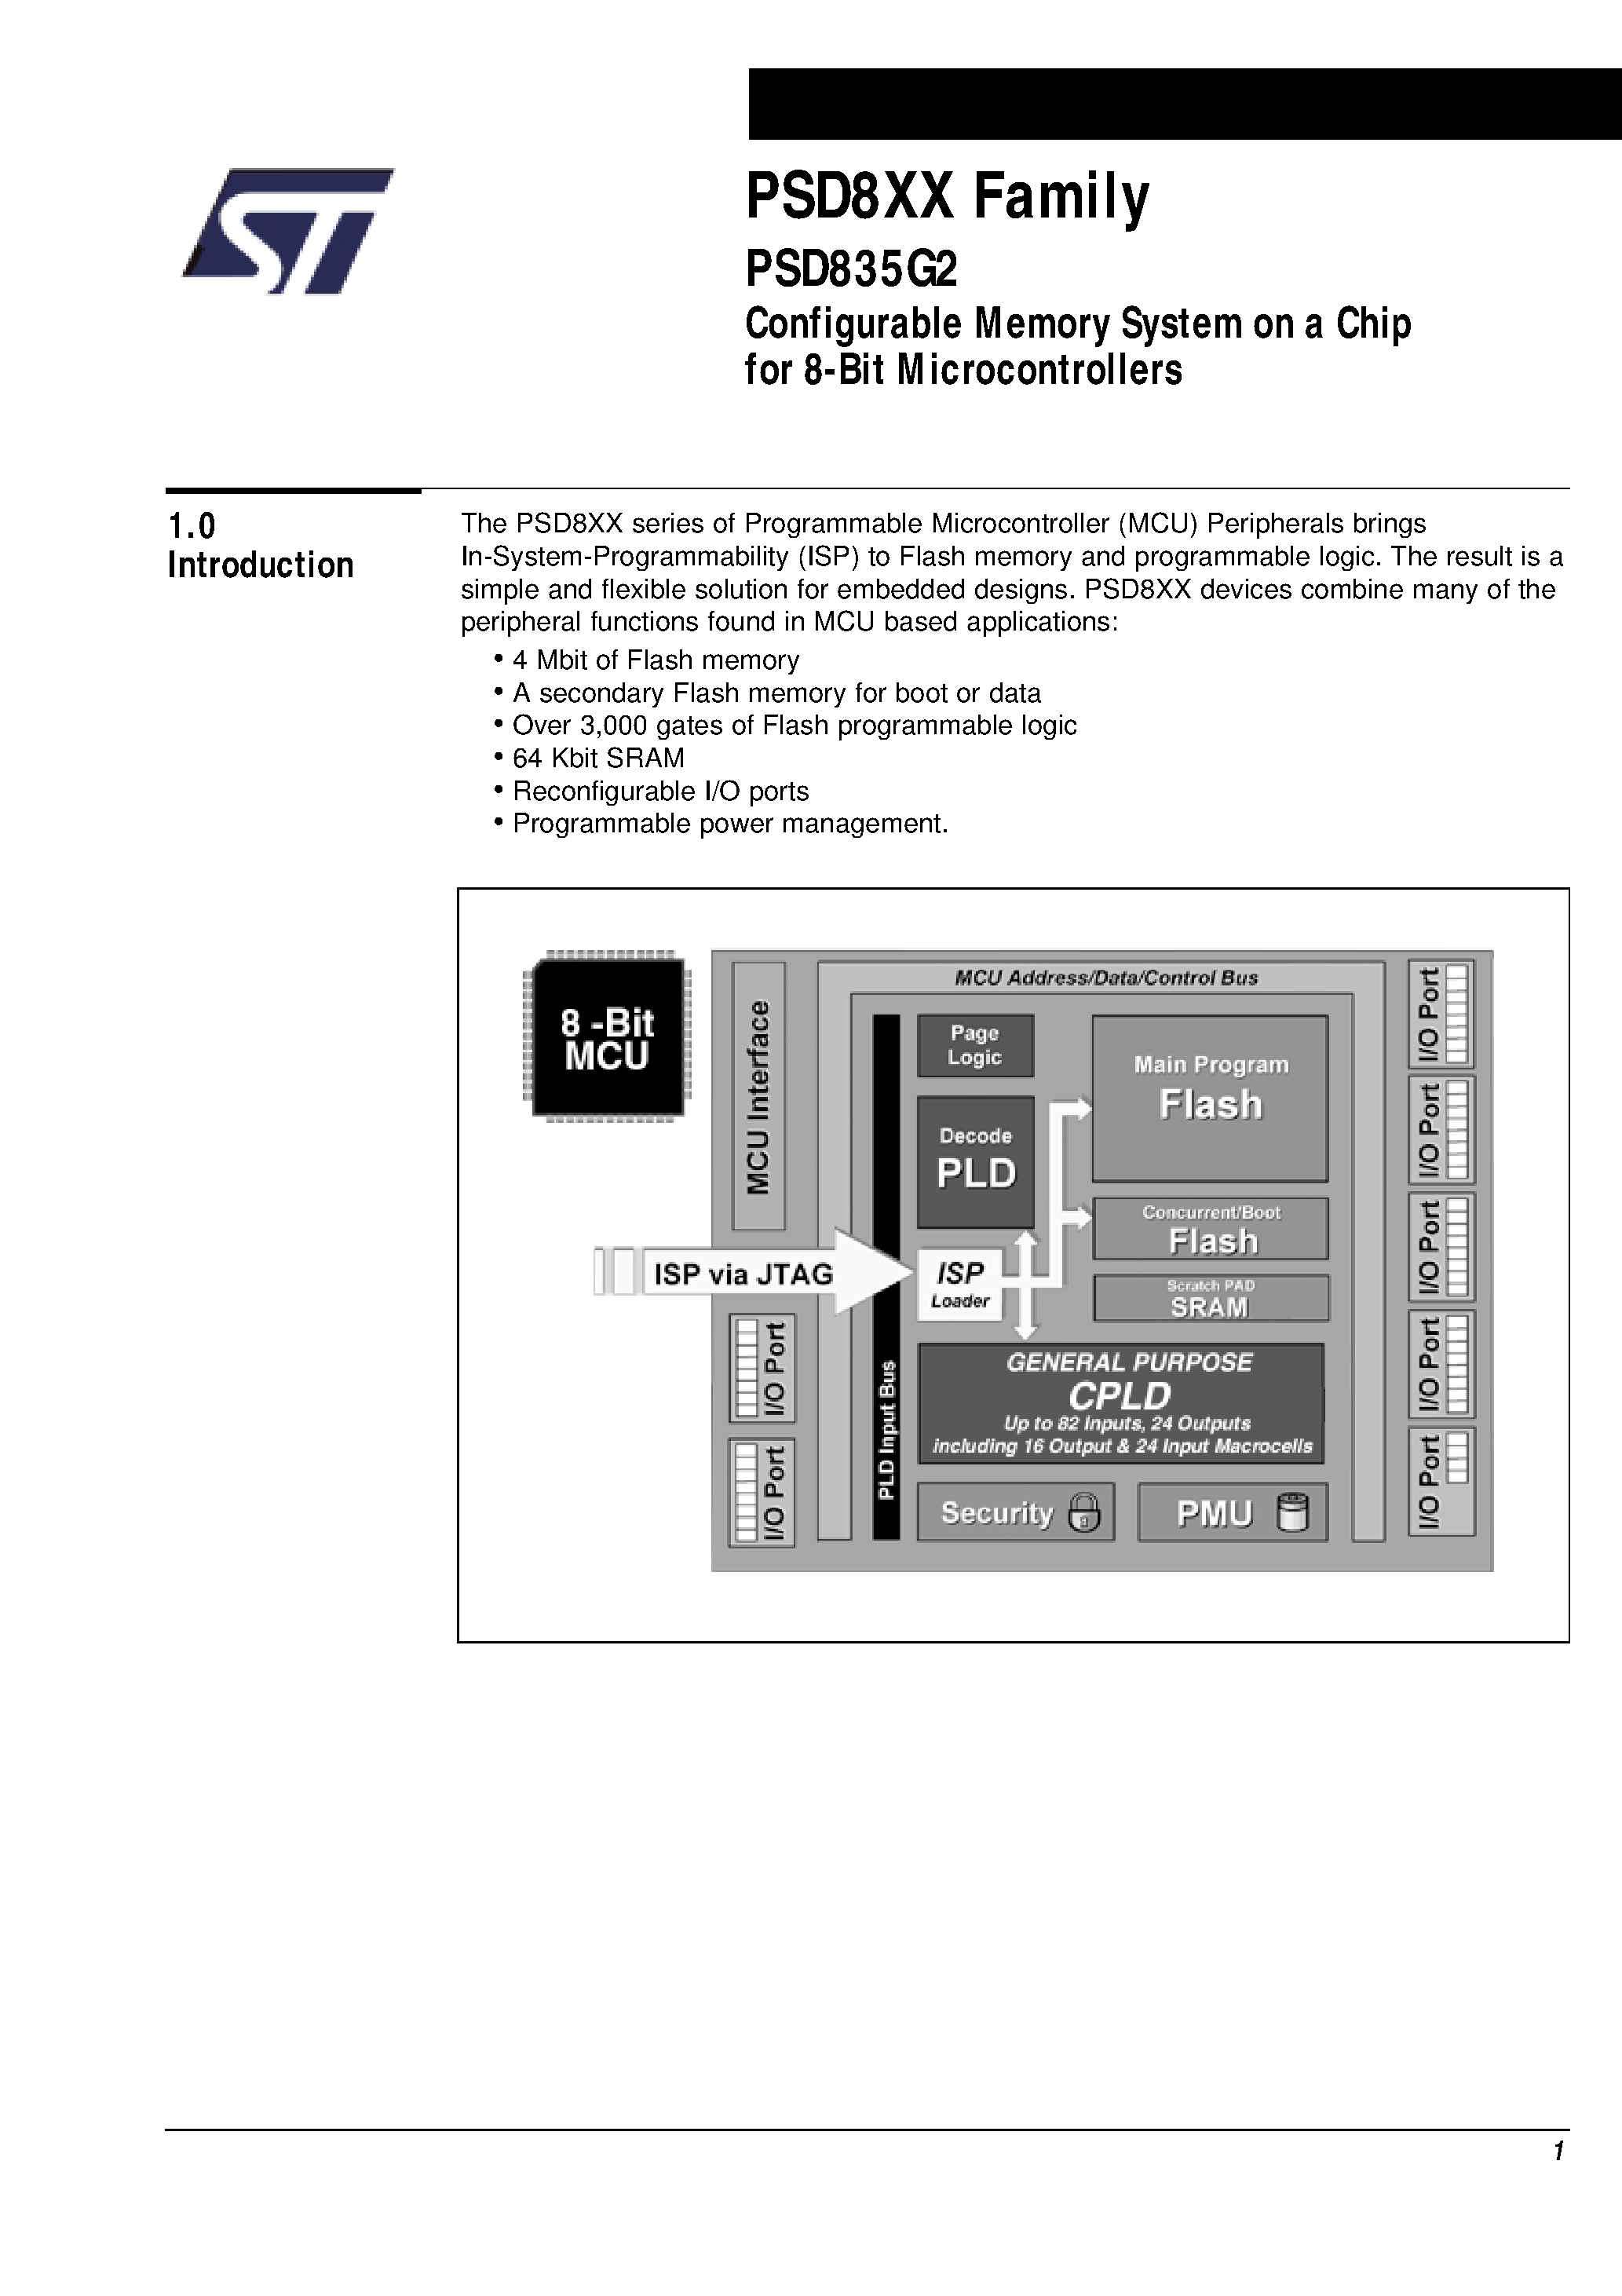 Datasheet PSD835F1V-A-20UI - Configurable Memory System on a Chip for 8-Bit Microcontrollers page 2